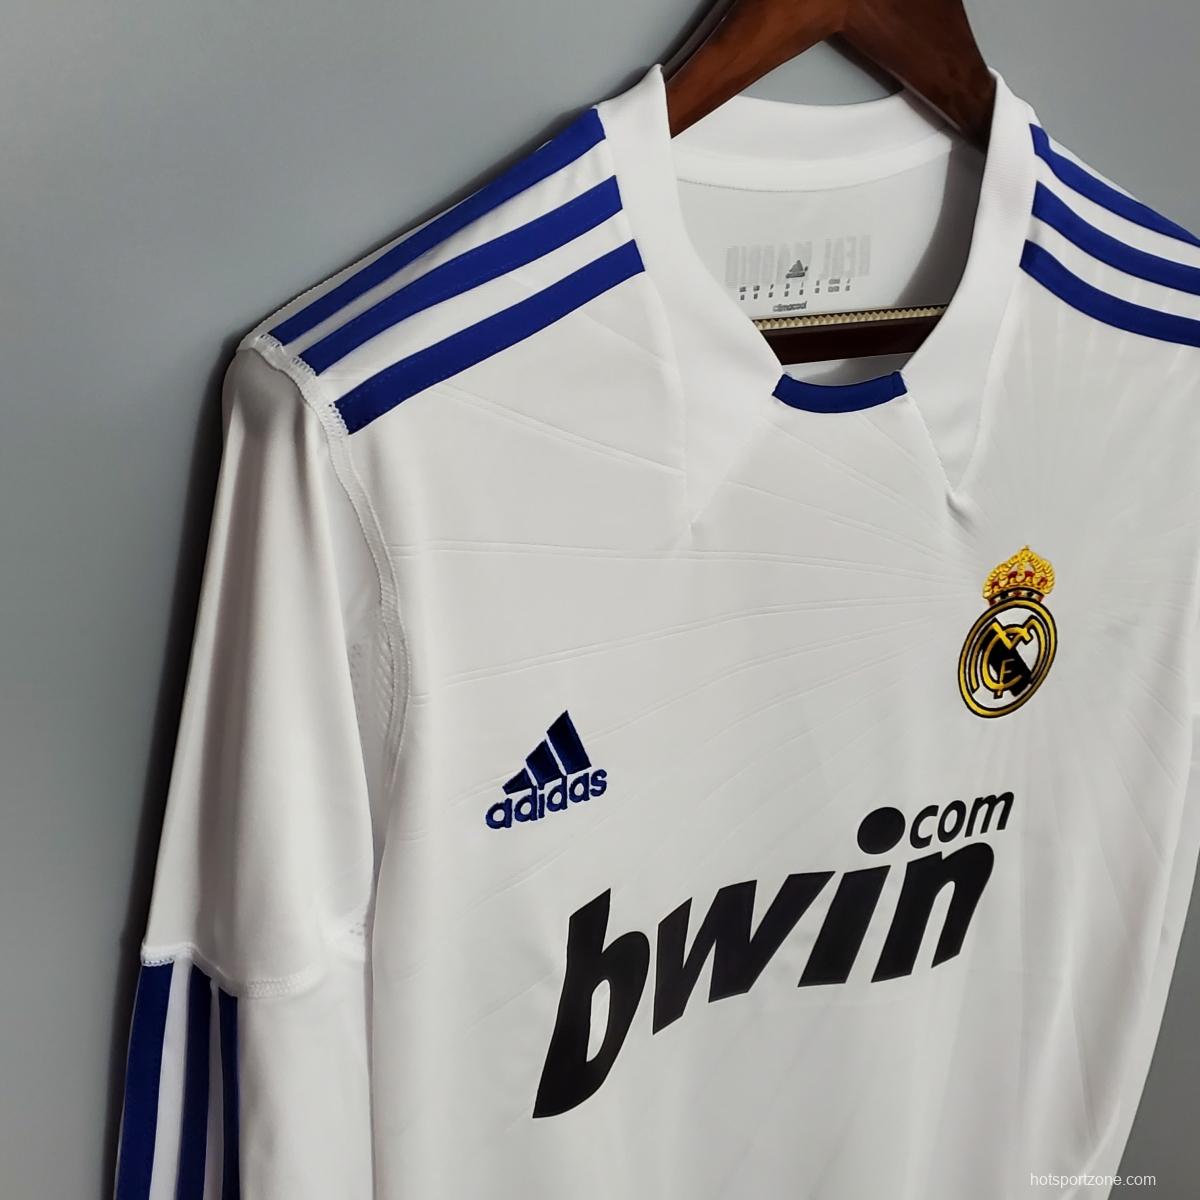 Retro Real Madrid 10/11 Long sleeve home Soccer Jersey